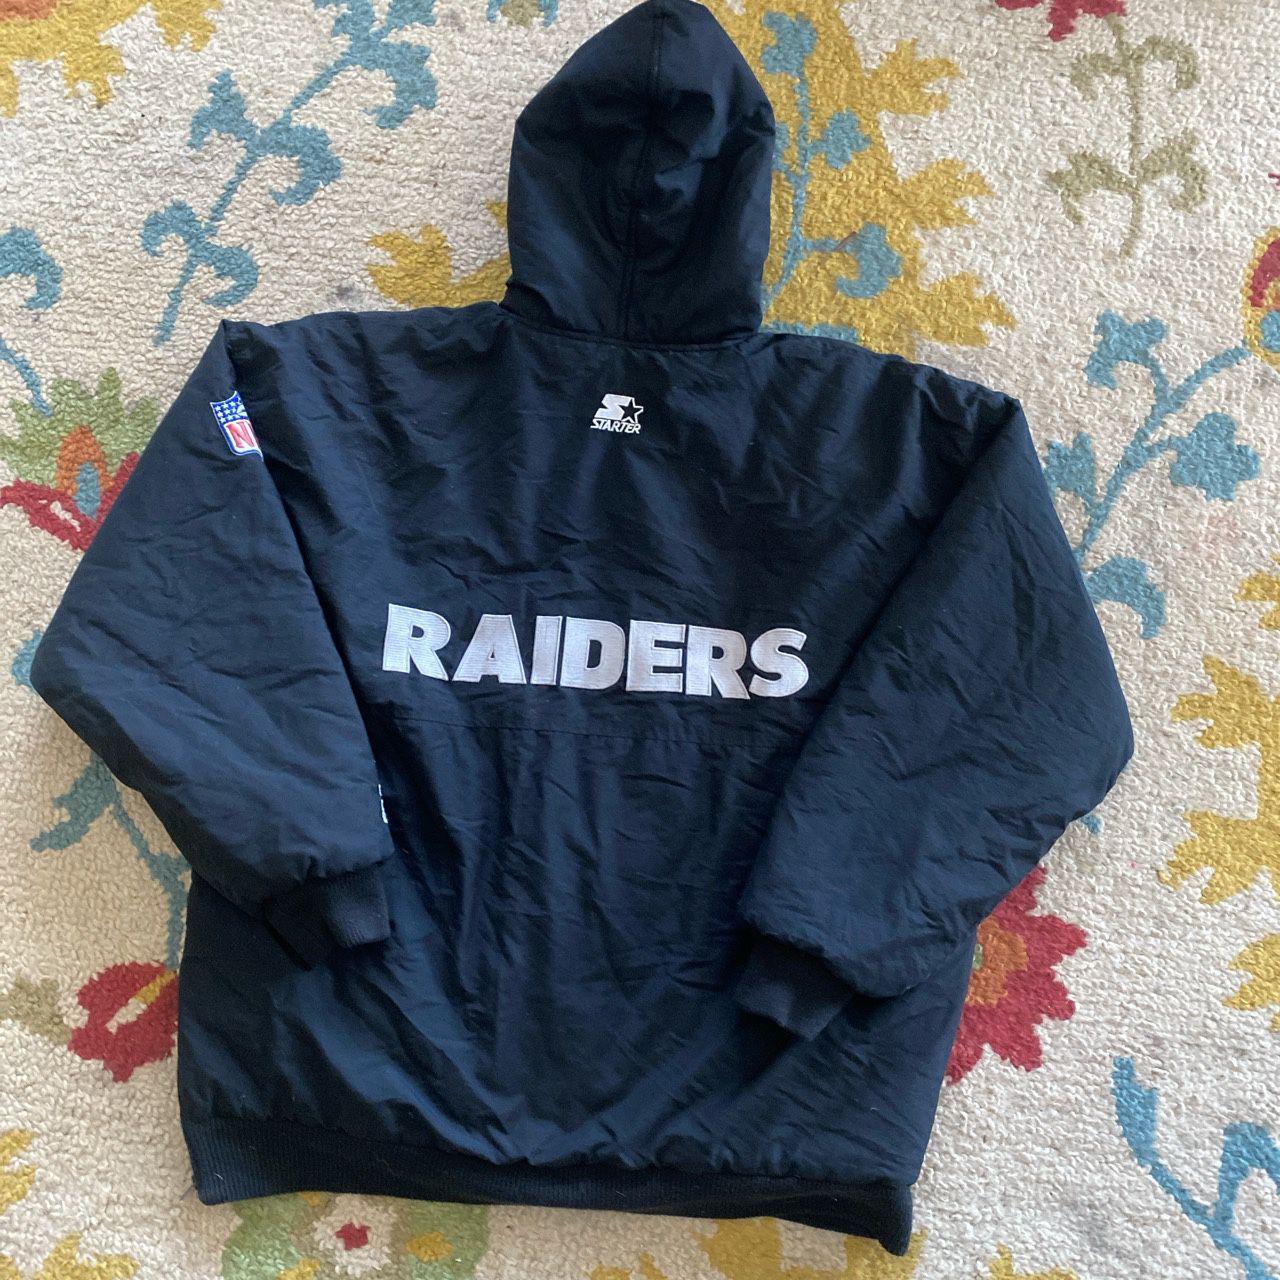 Vintage Oakland Raiders Jacket for Sale in Barnstable, MA - OfferUp